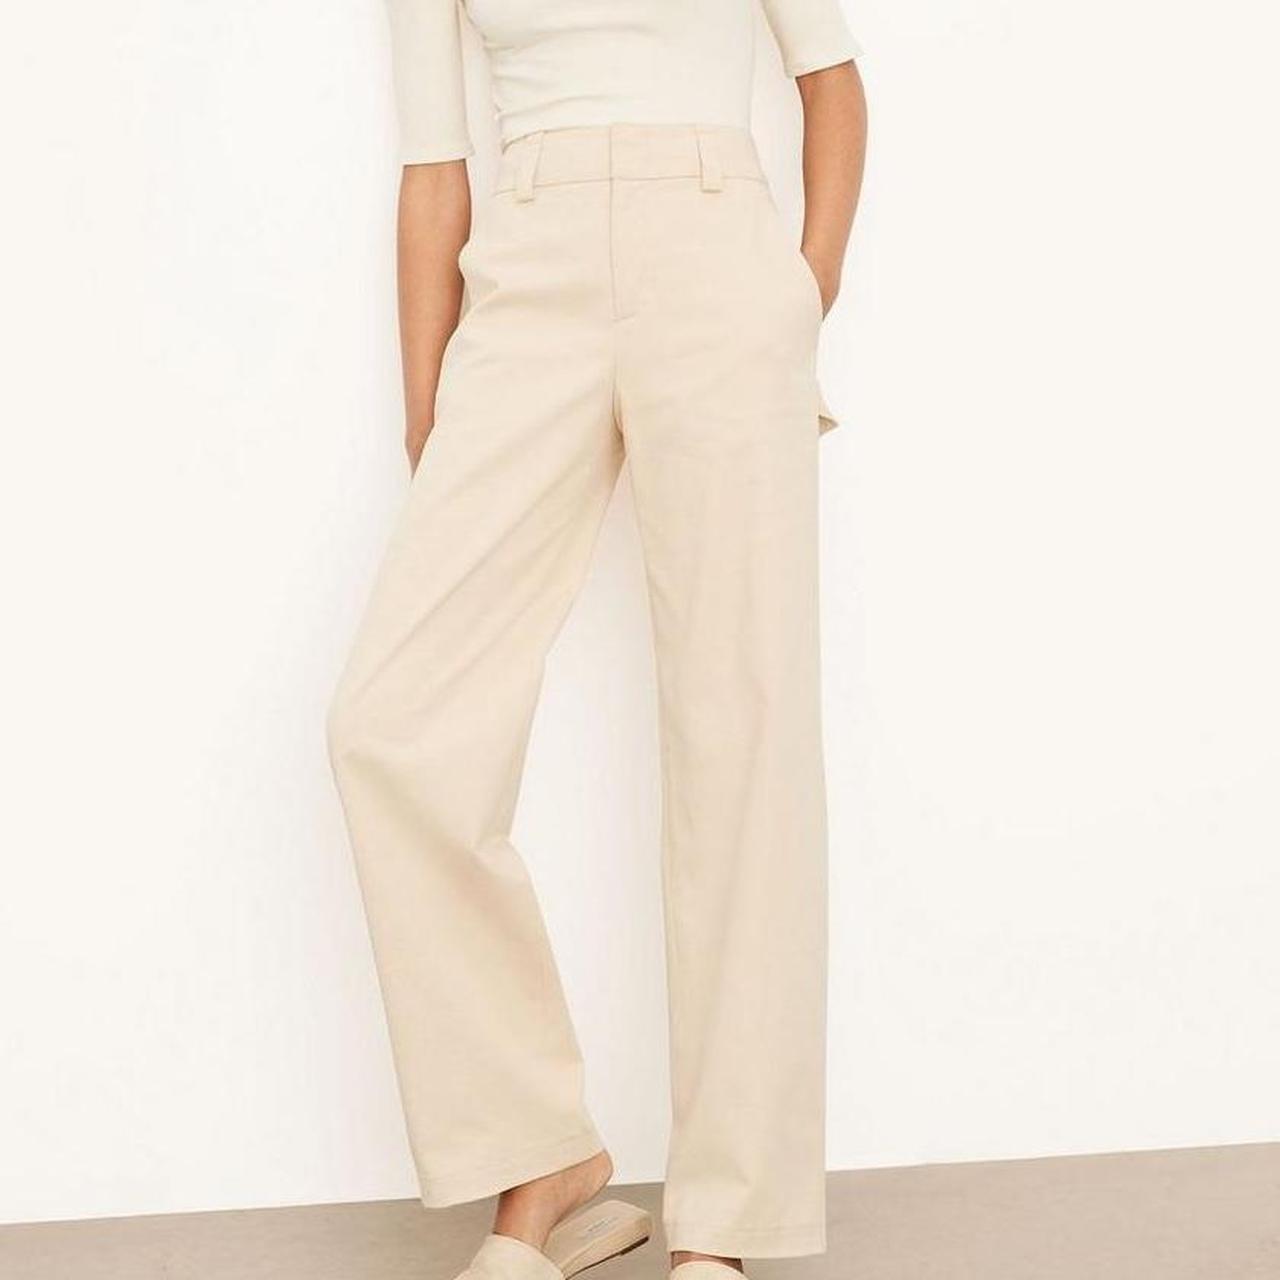 Vince Women's Cream and Tan Trousers (2)